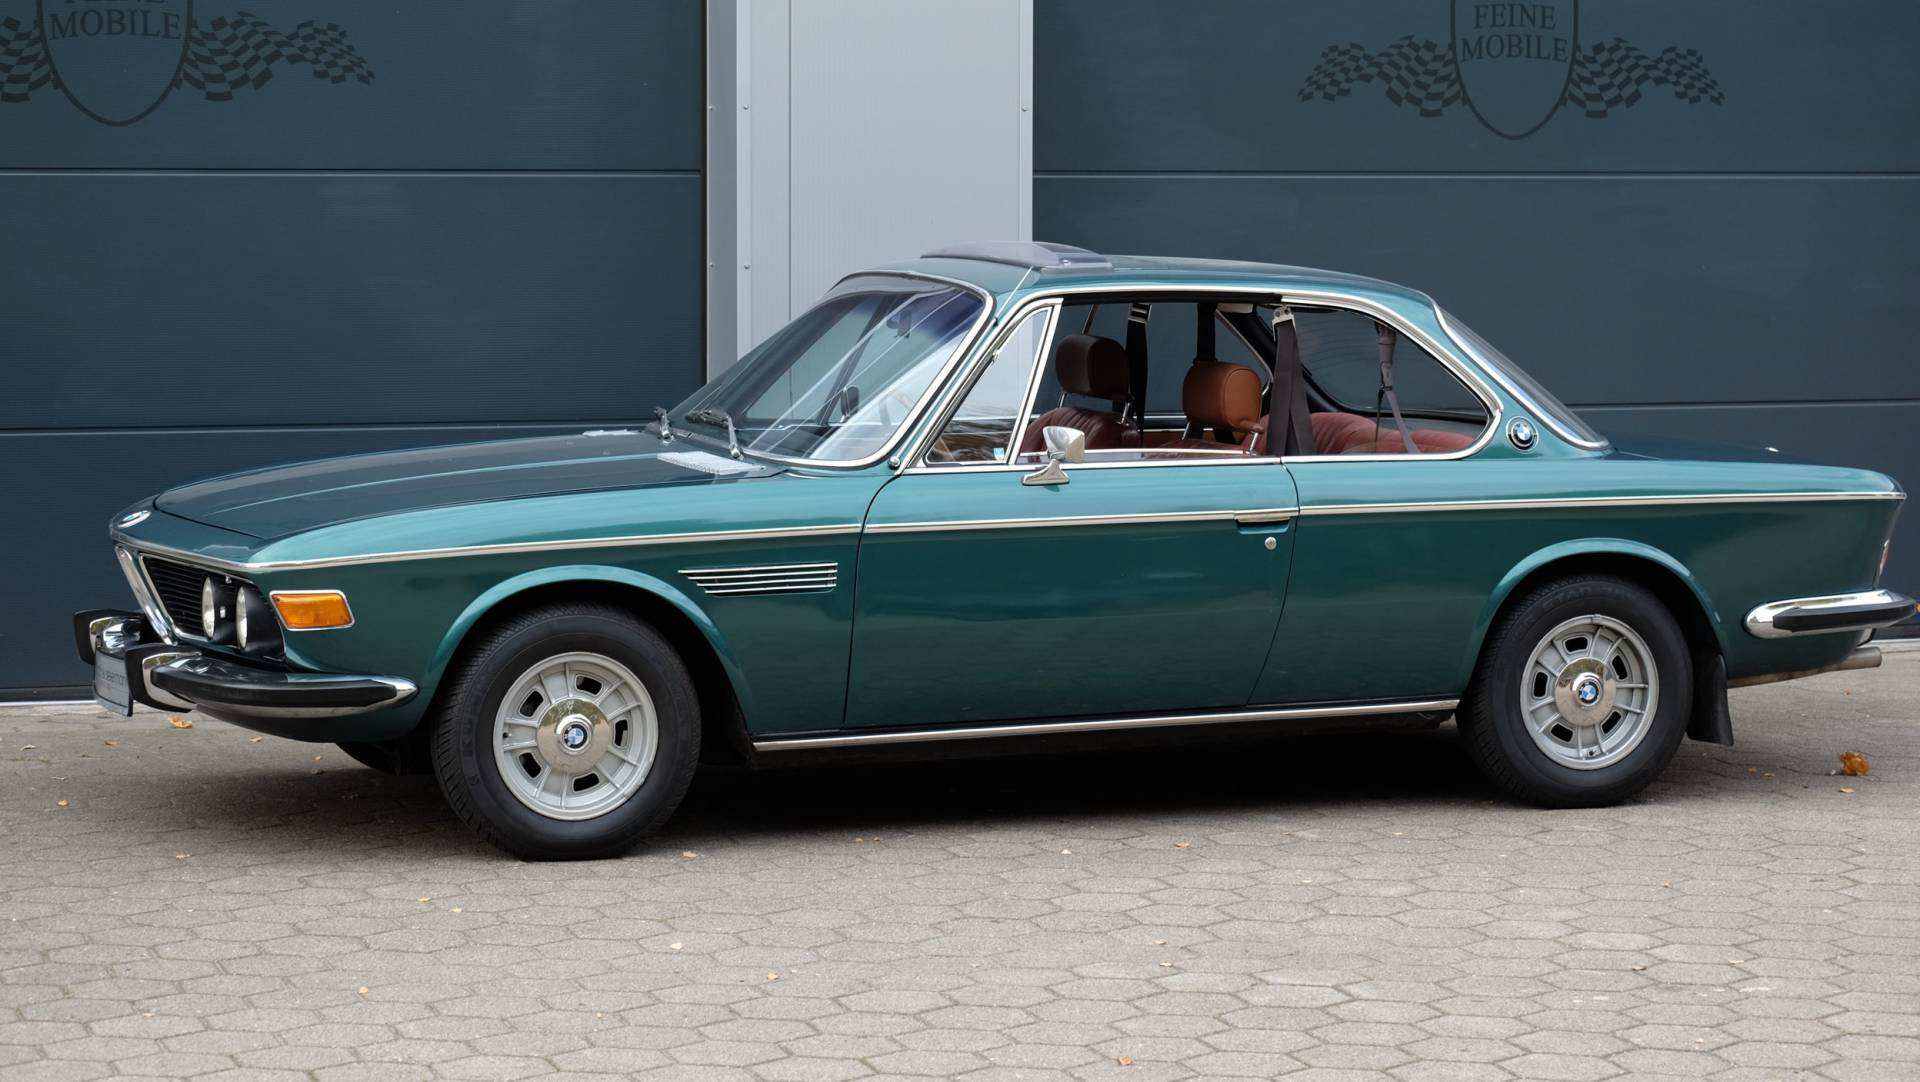 For Sale BMW 3.0 CS (1971) offered for GBP 53,755